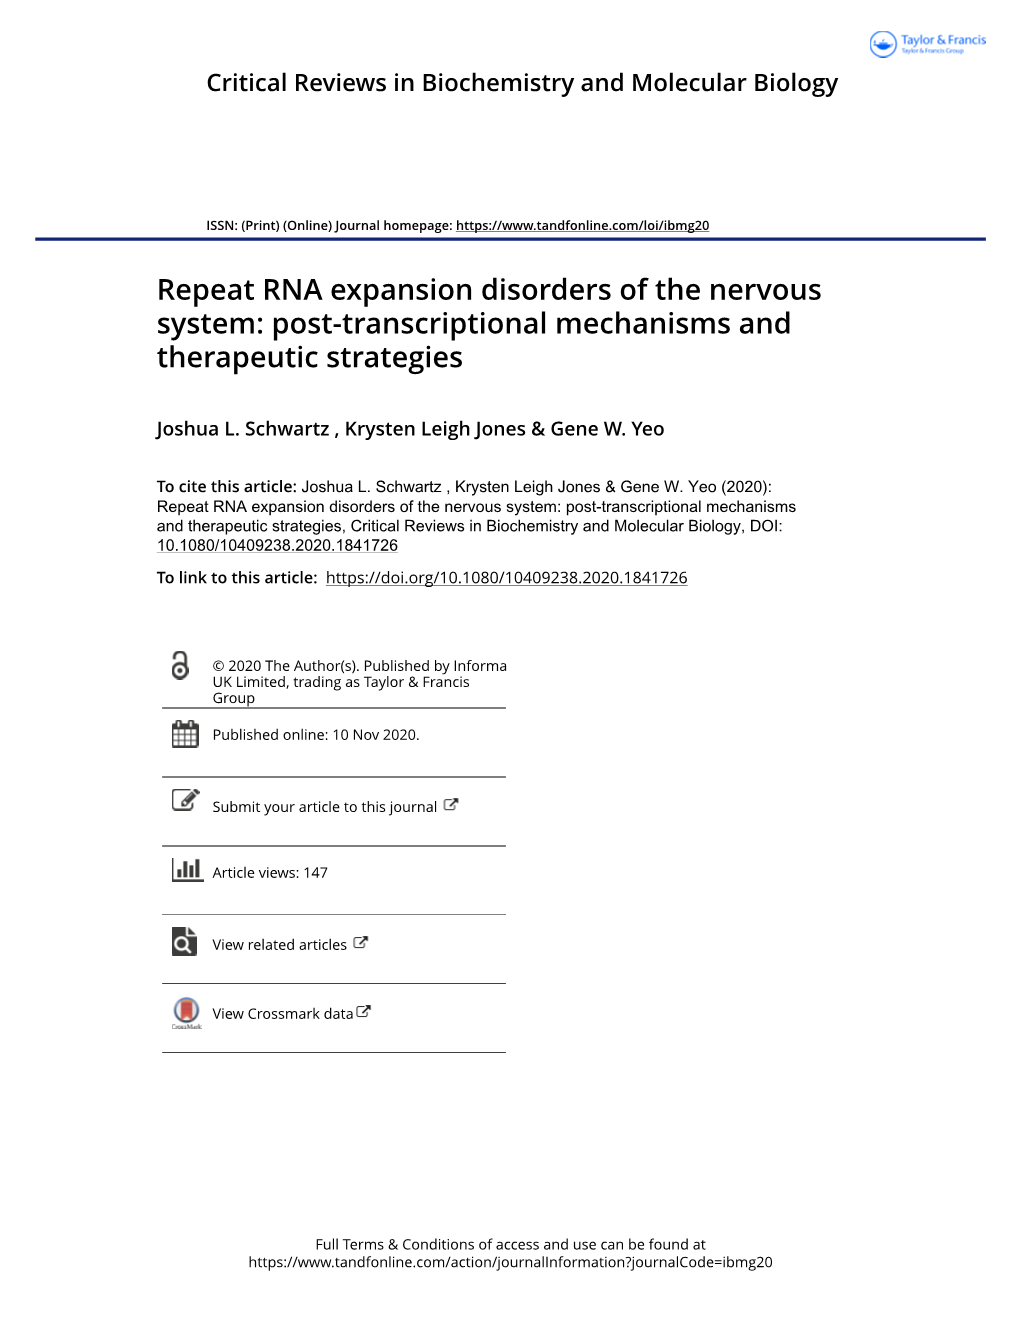 Repeat RNA Expansion Disorders of the Nervous System: Post-Transcriptional Mechanisms and Therapeutic Strategies